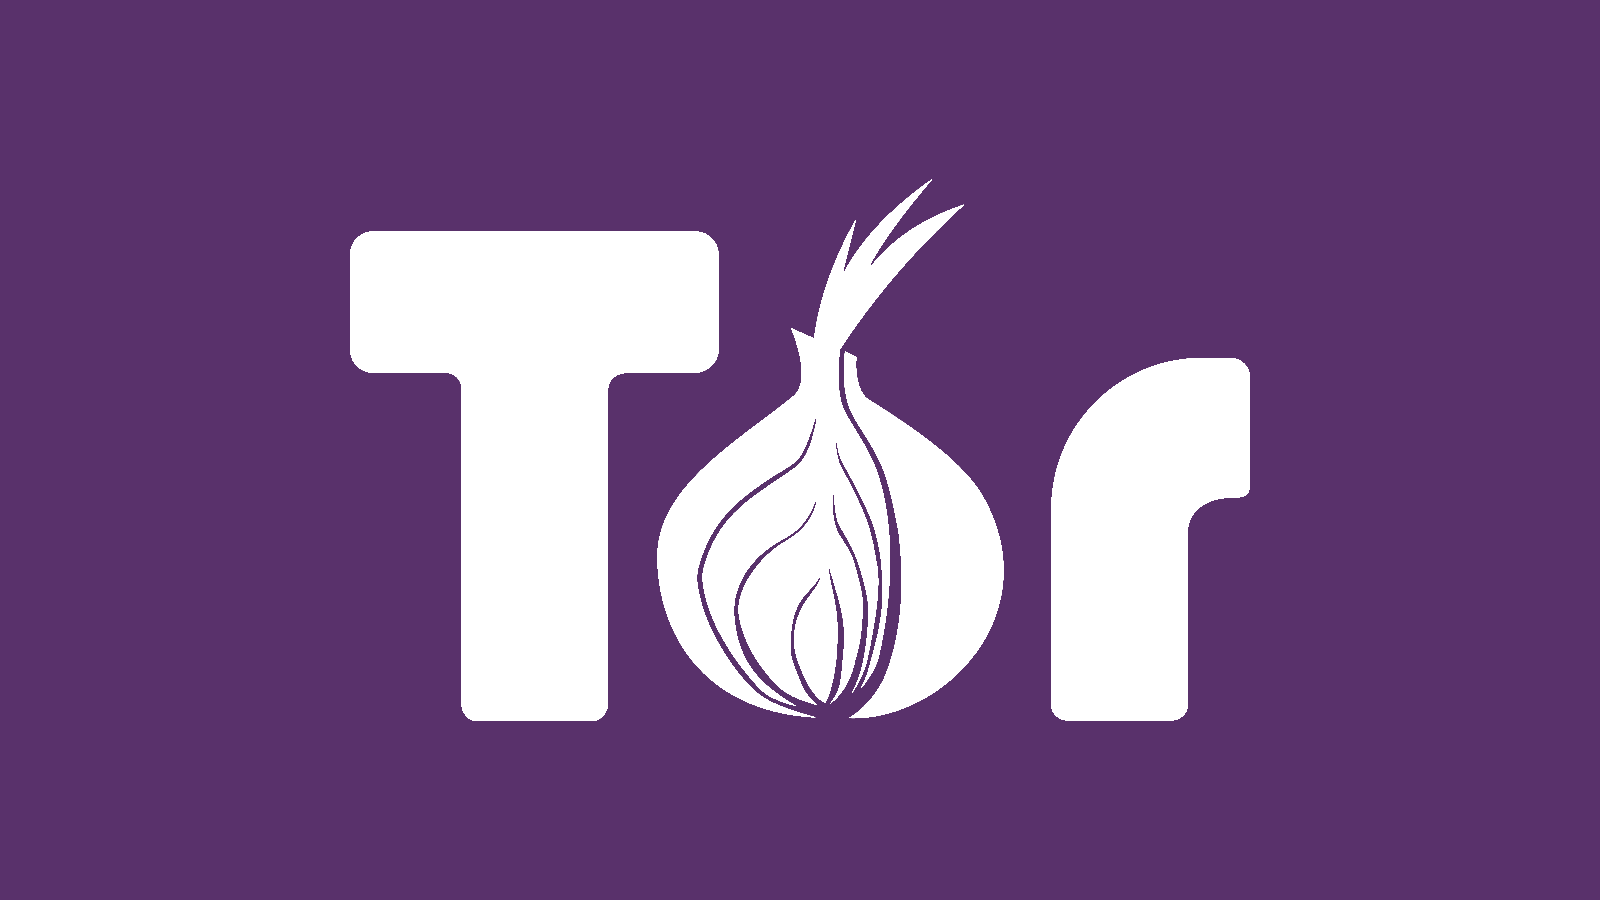 Tor Browser now bypasses internet censorship automatically